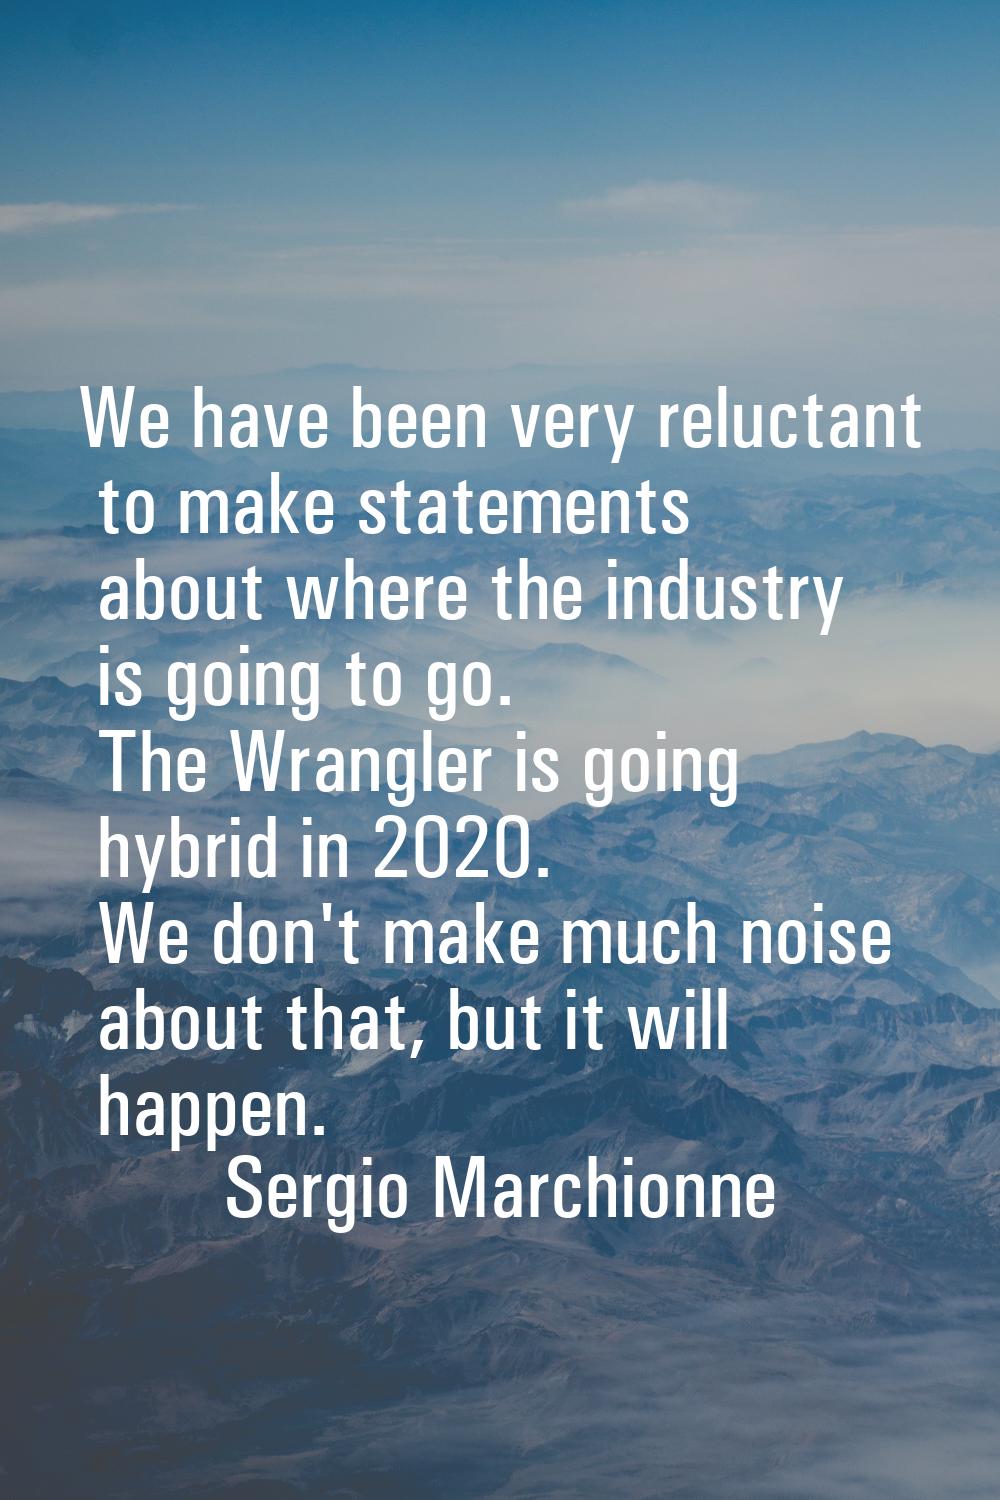 We have been very reluctant to make statements about where the industry is going to go. The Wrangle